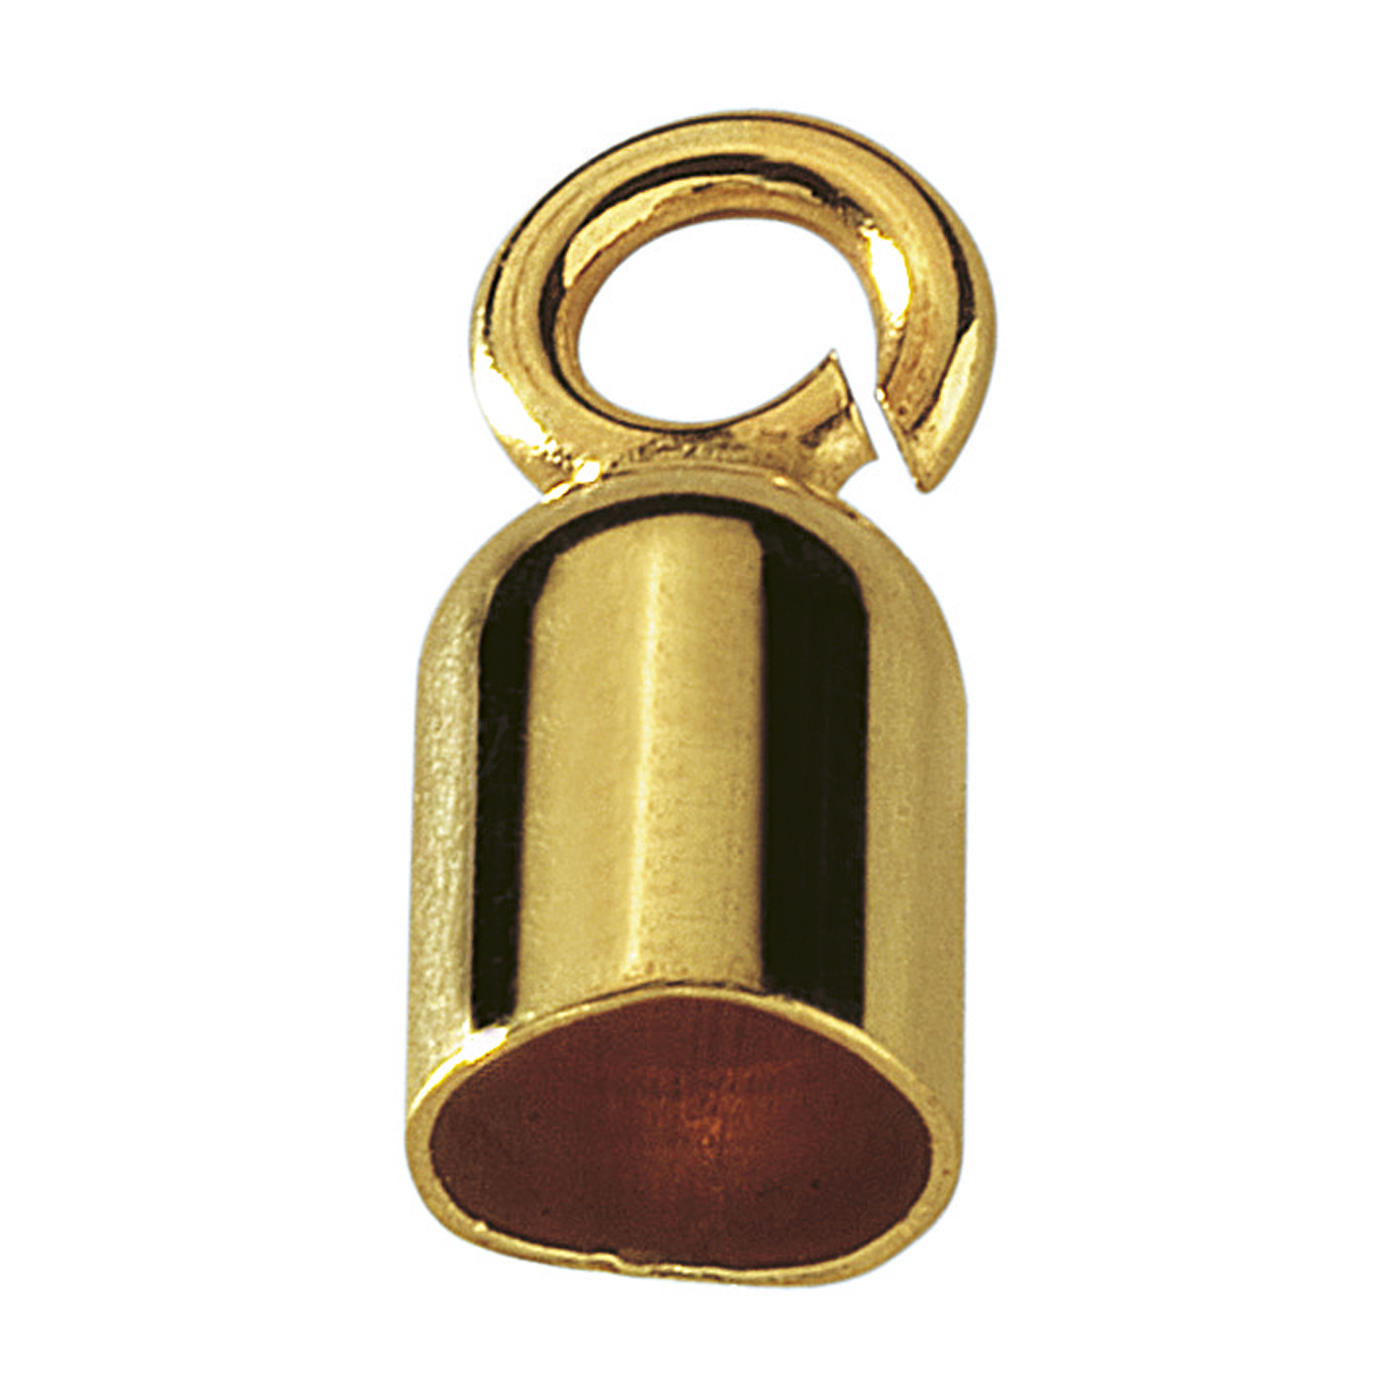 End Cap, Cylinder, Rolled Gold, ø 3 mm, Small Lug - 1 piece